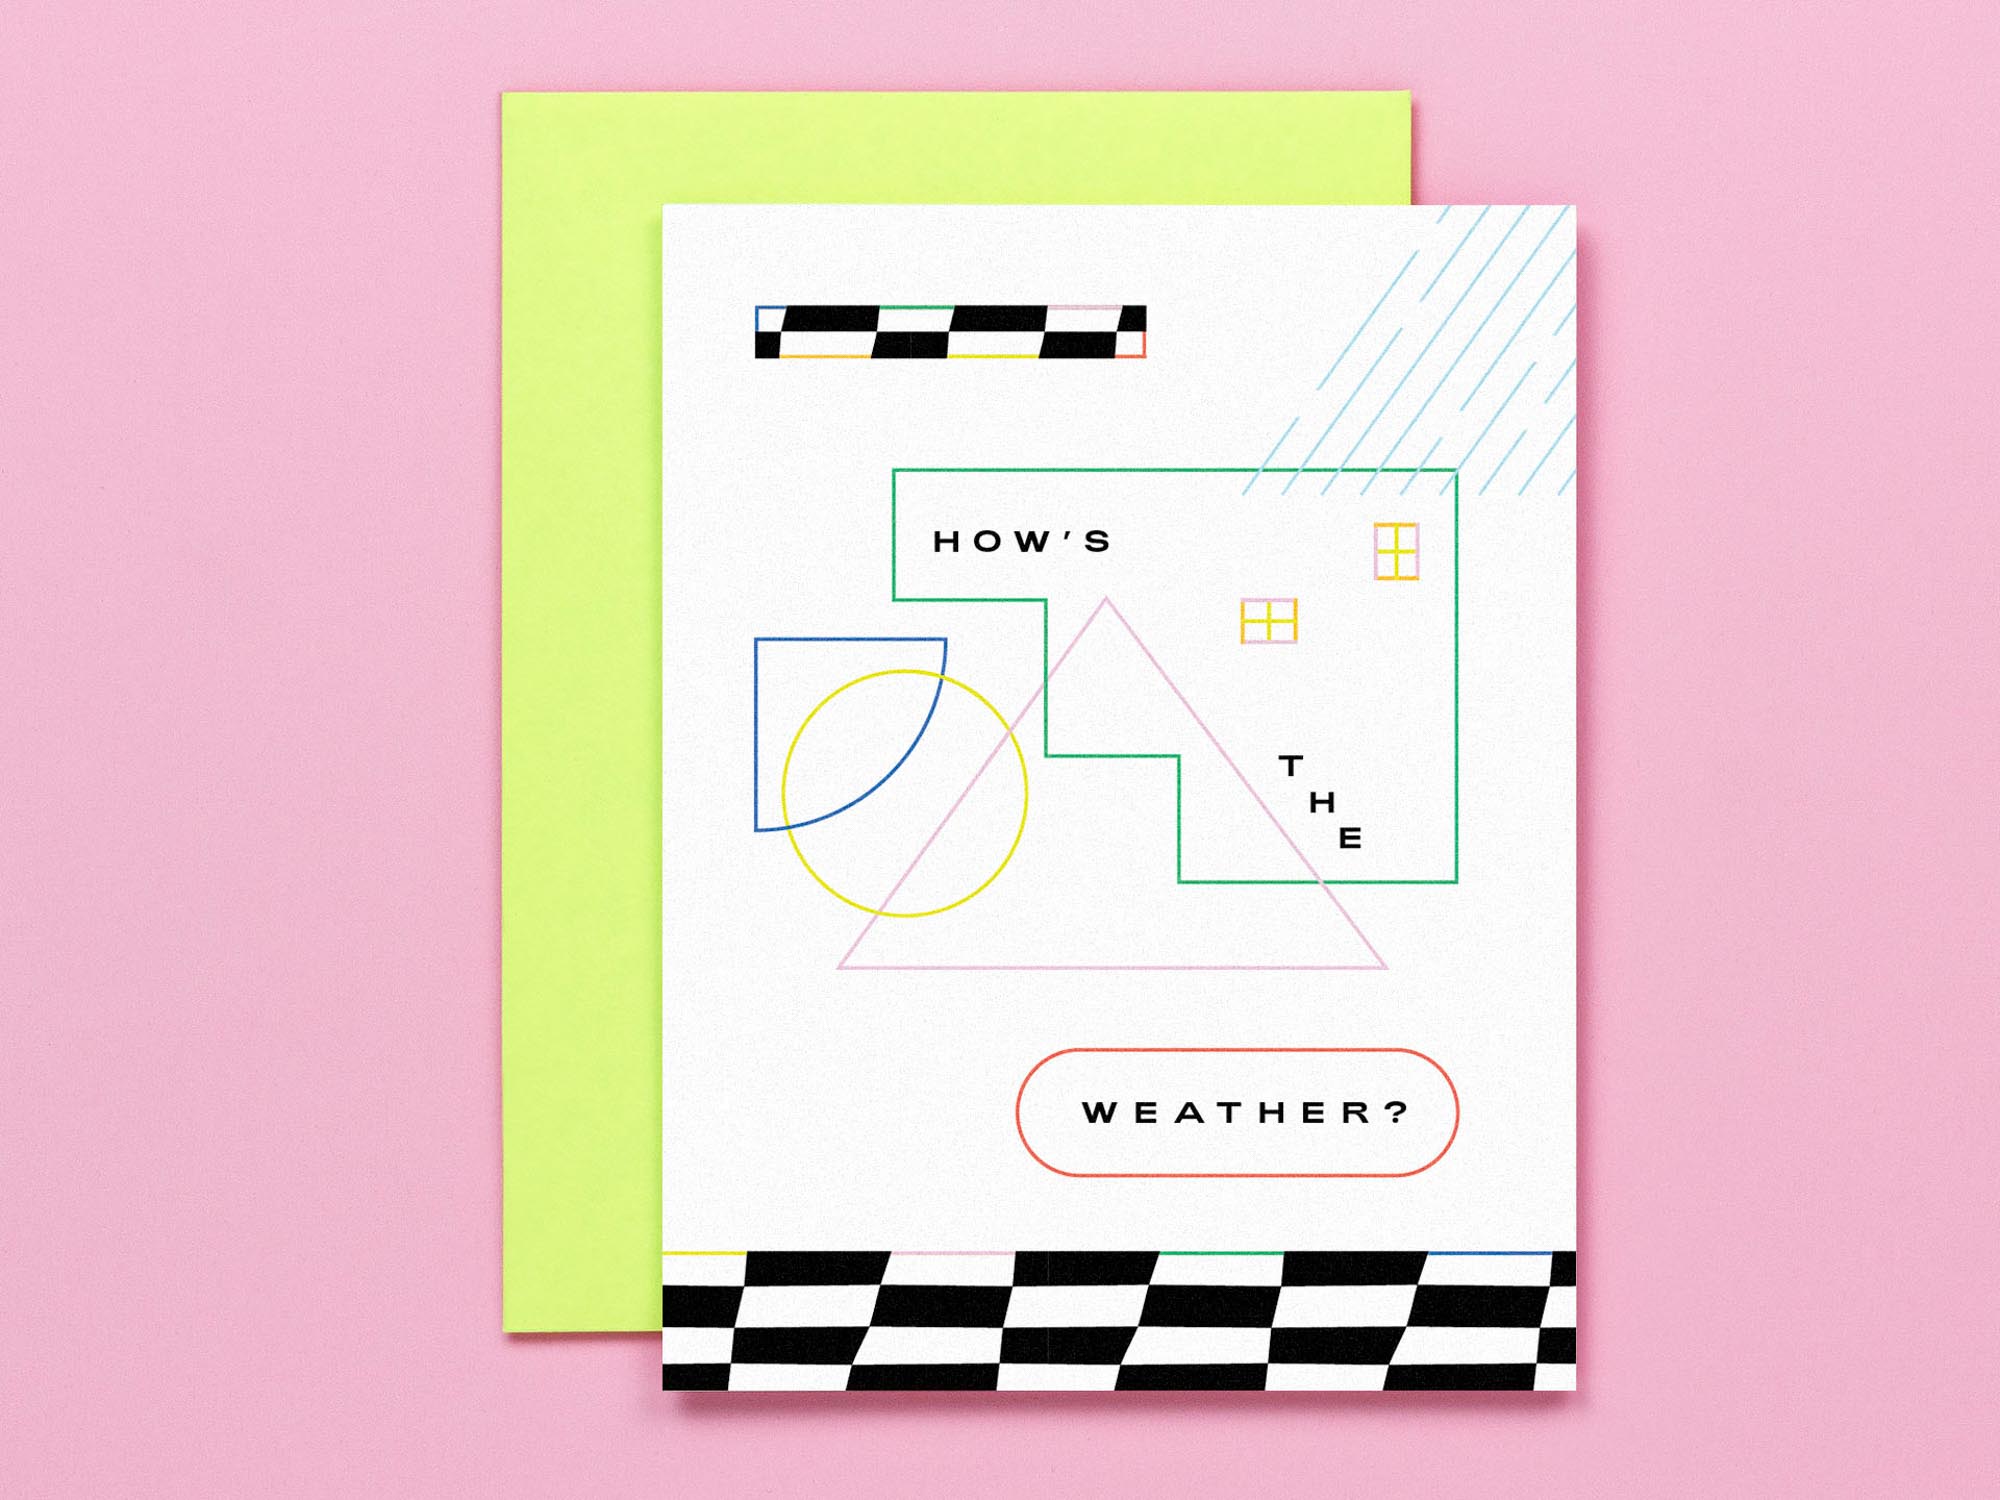 "How's the weather" Hello thinking of you greeting card with geometric shapes abstract design. Made in USA by @mydarlin_bk